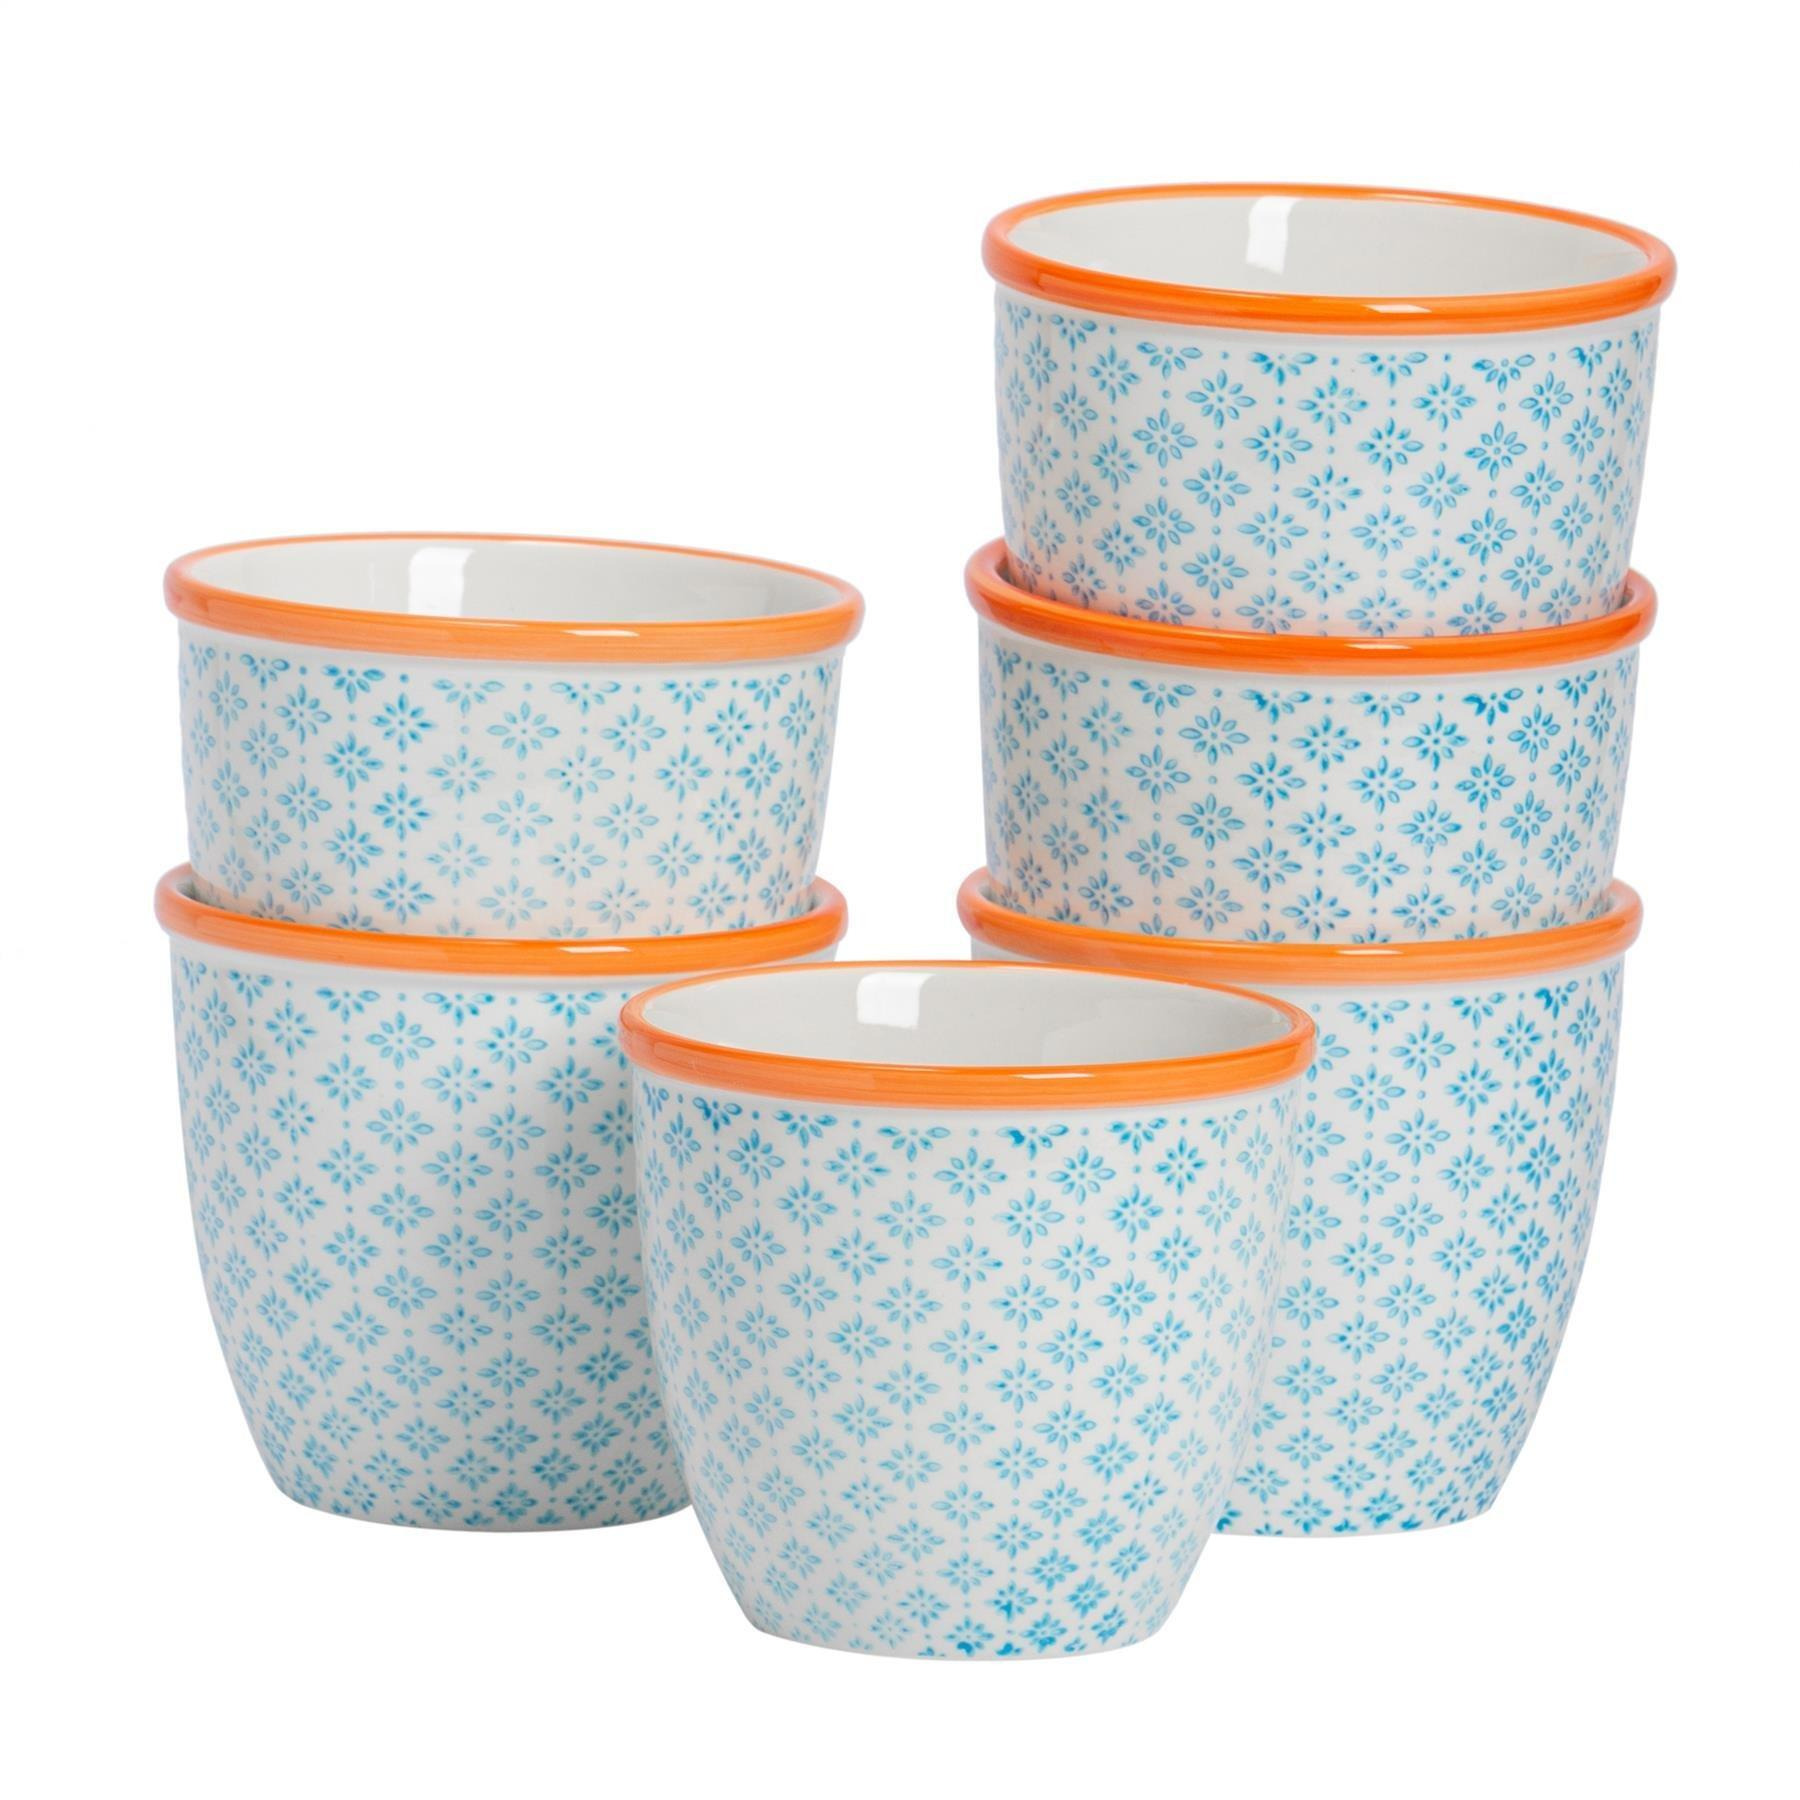 Hand-Printed Plant Pots 14cm Pack of 6 - image 1